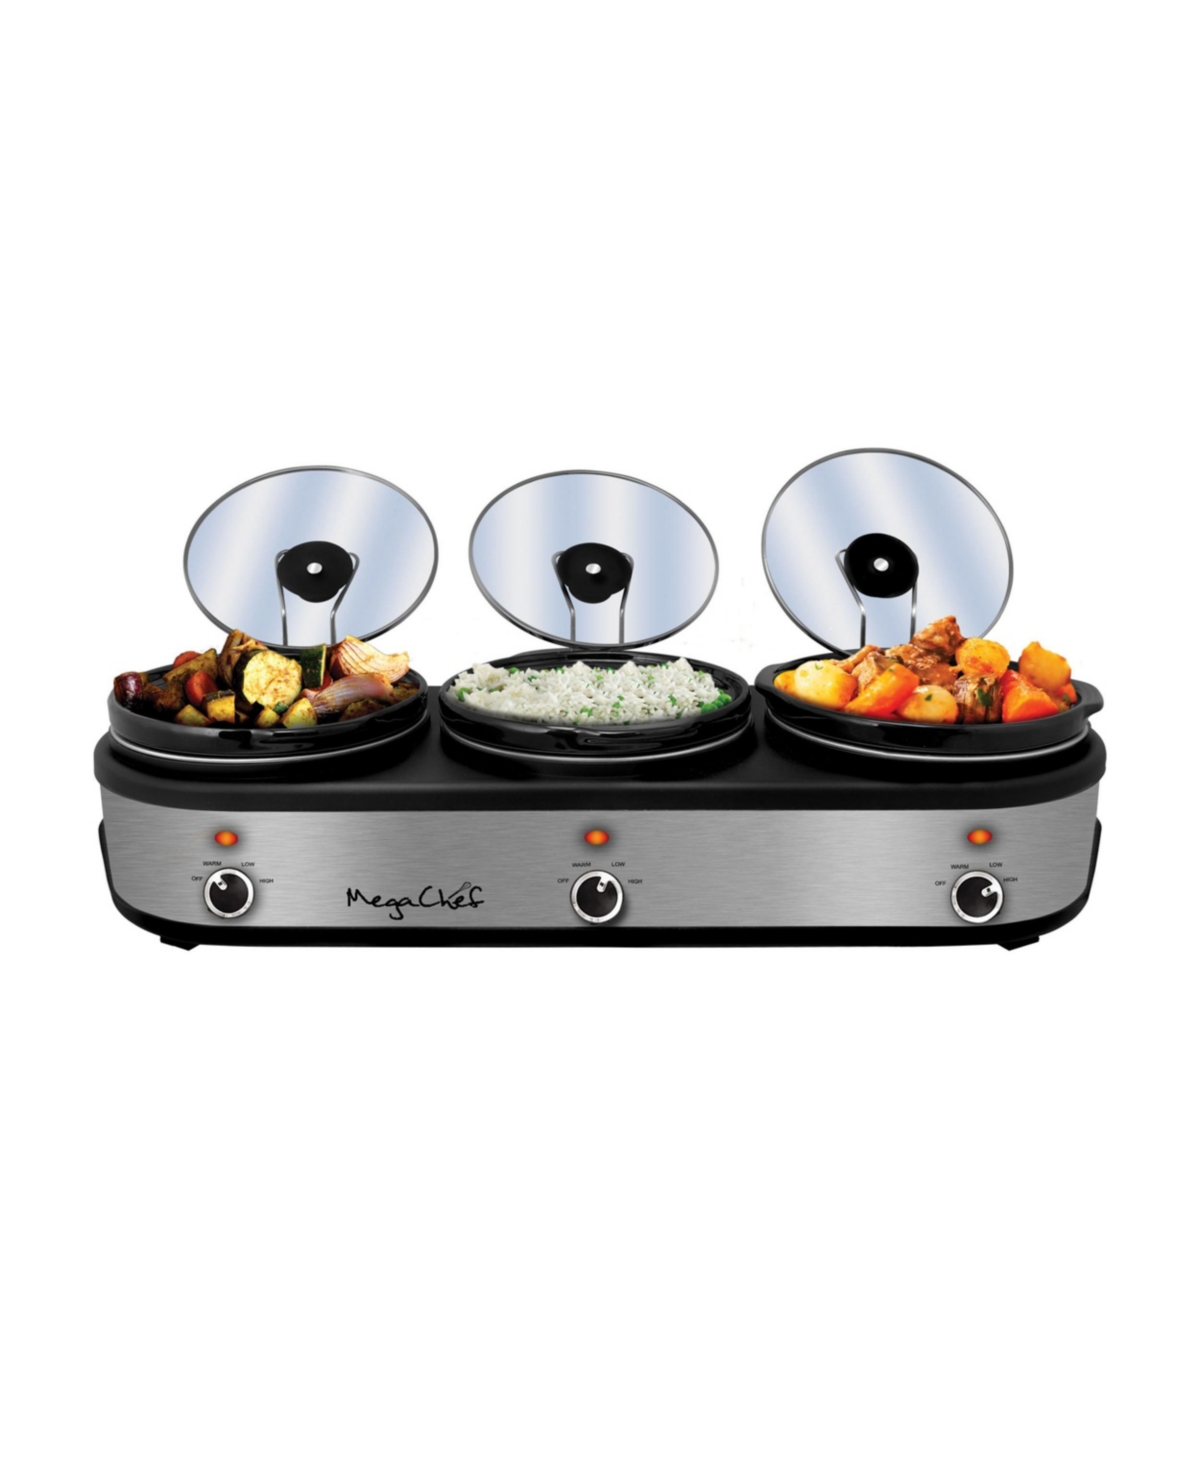 MEGACHEF TRIPLE 2.5 QUART SLOW COOKER AND BUFFET SERVER IN BRUSHED SILVER AND BLACK FINISH WITH 3 CERAMIC COO